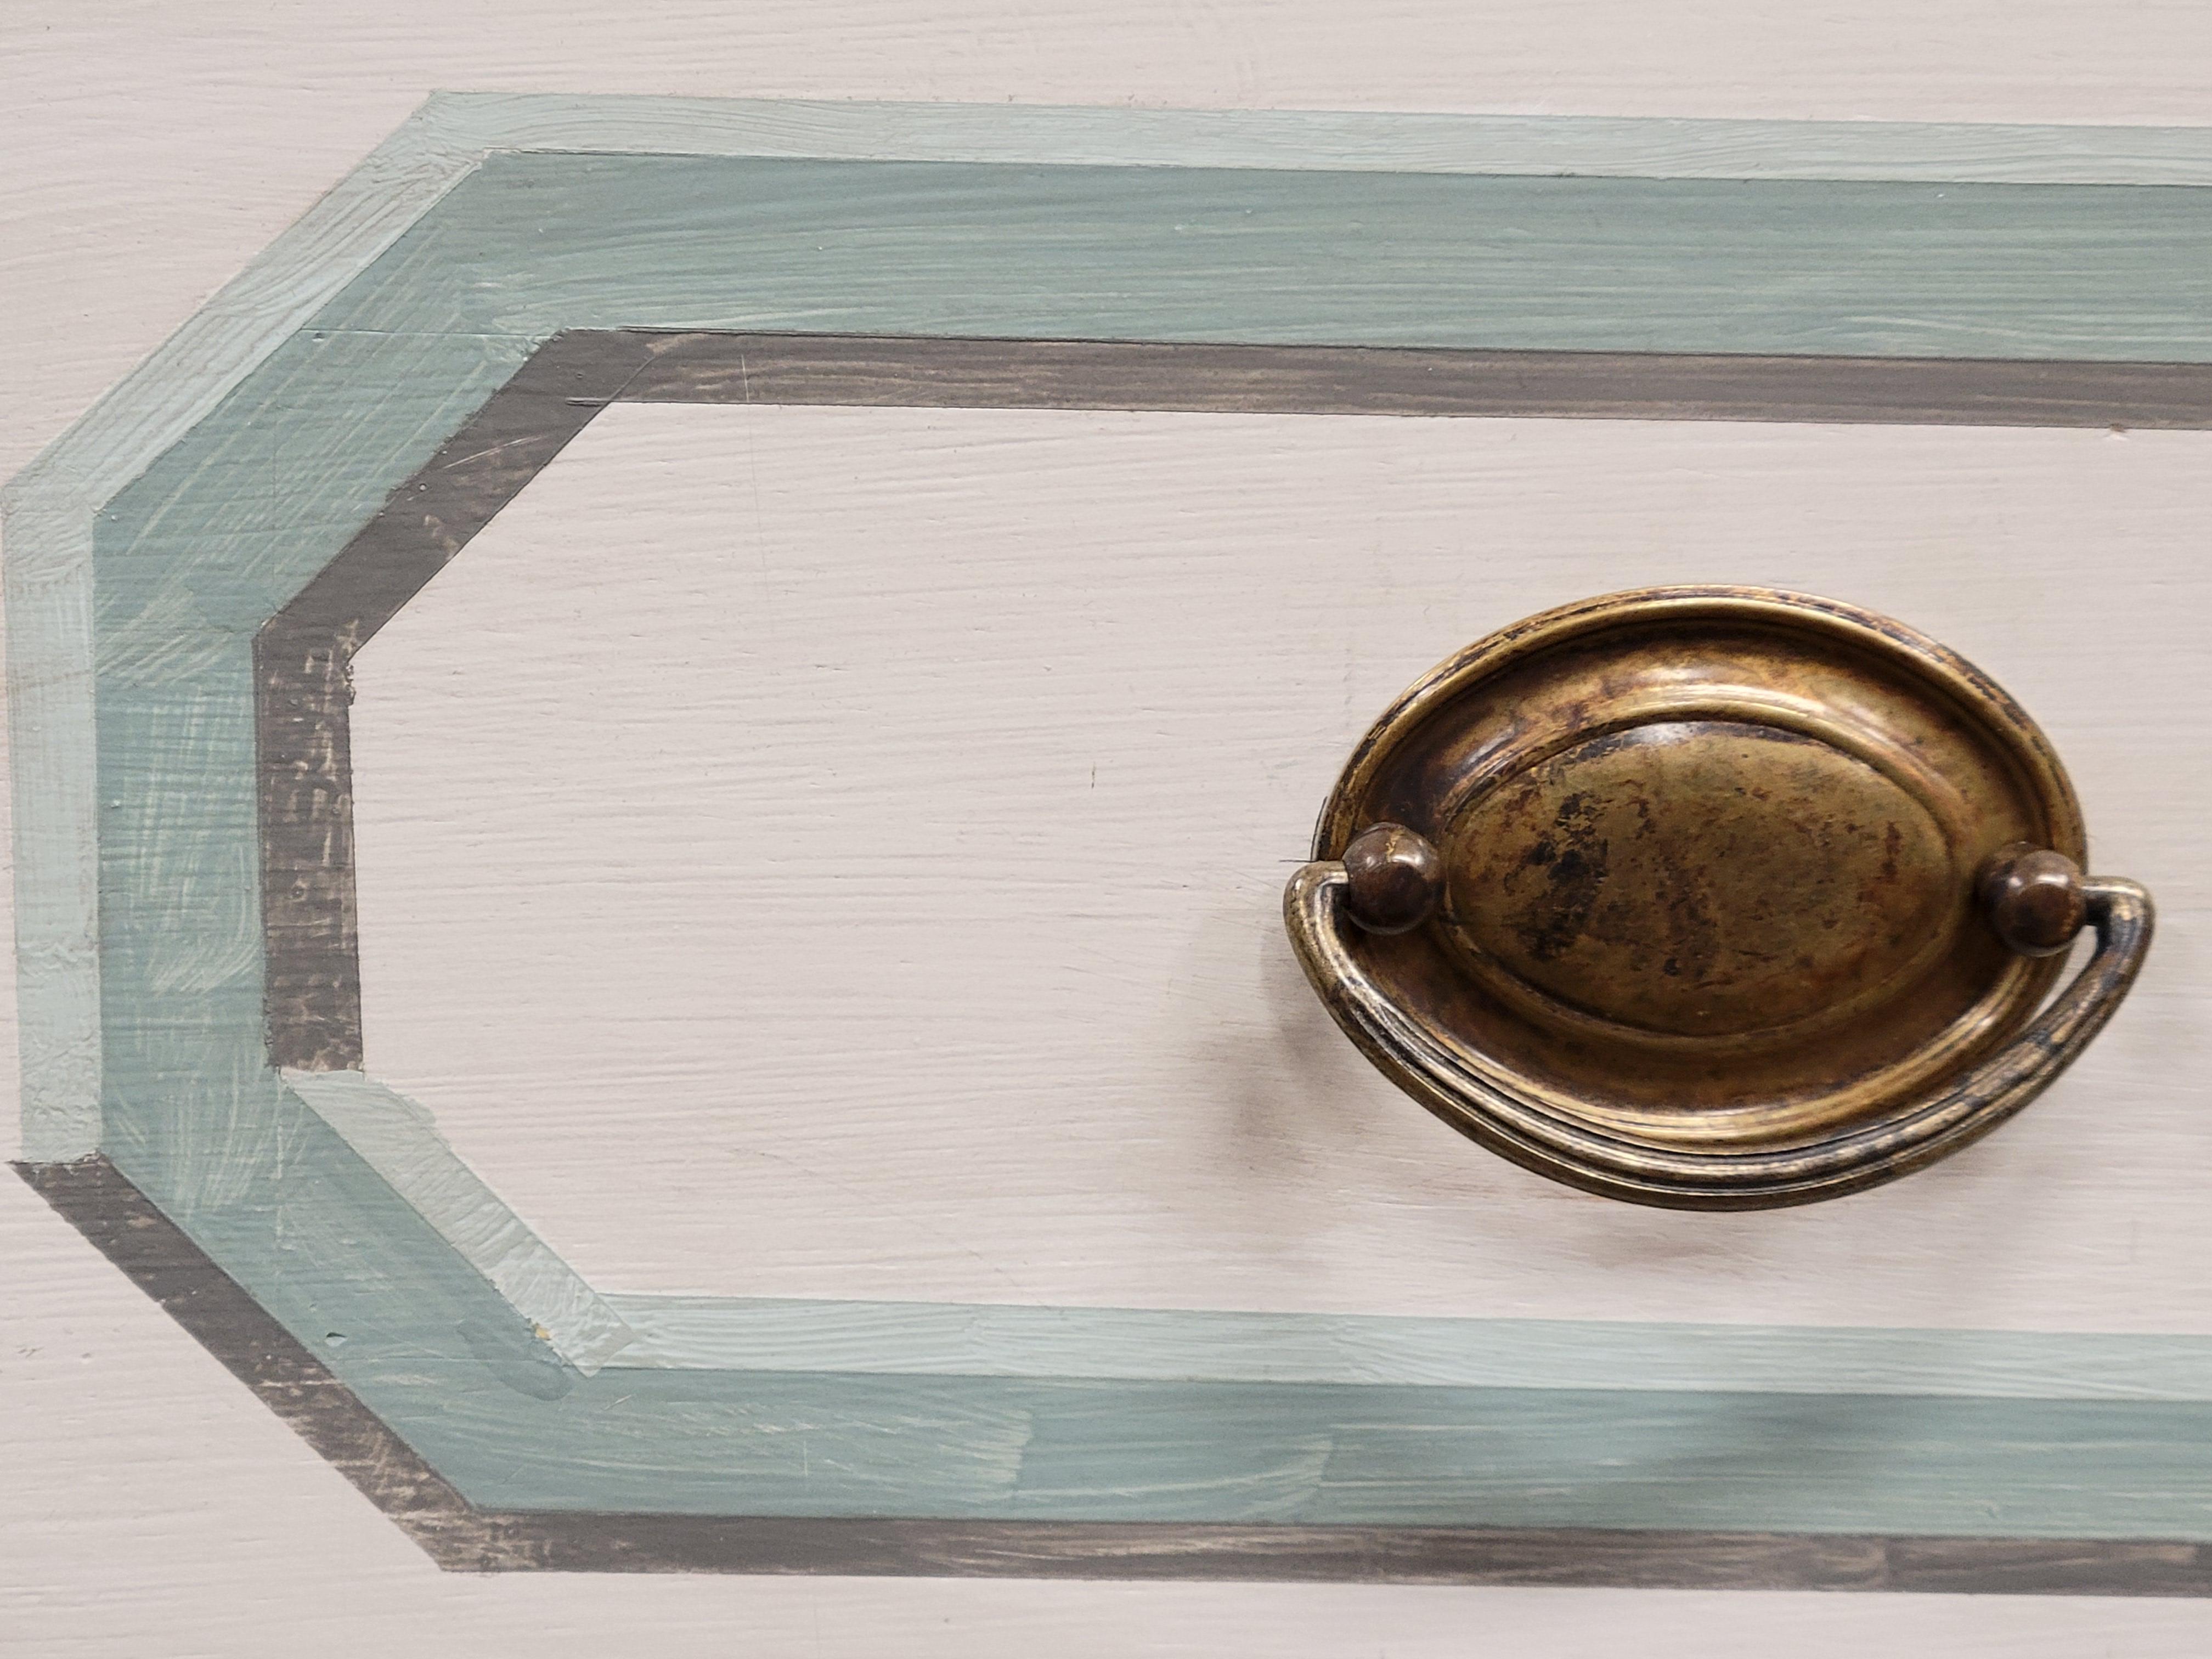 Neoclassical Antique Pine Dresser Painted White With Aqua and Gray Trompe l'Oiel French Line 